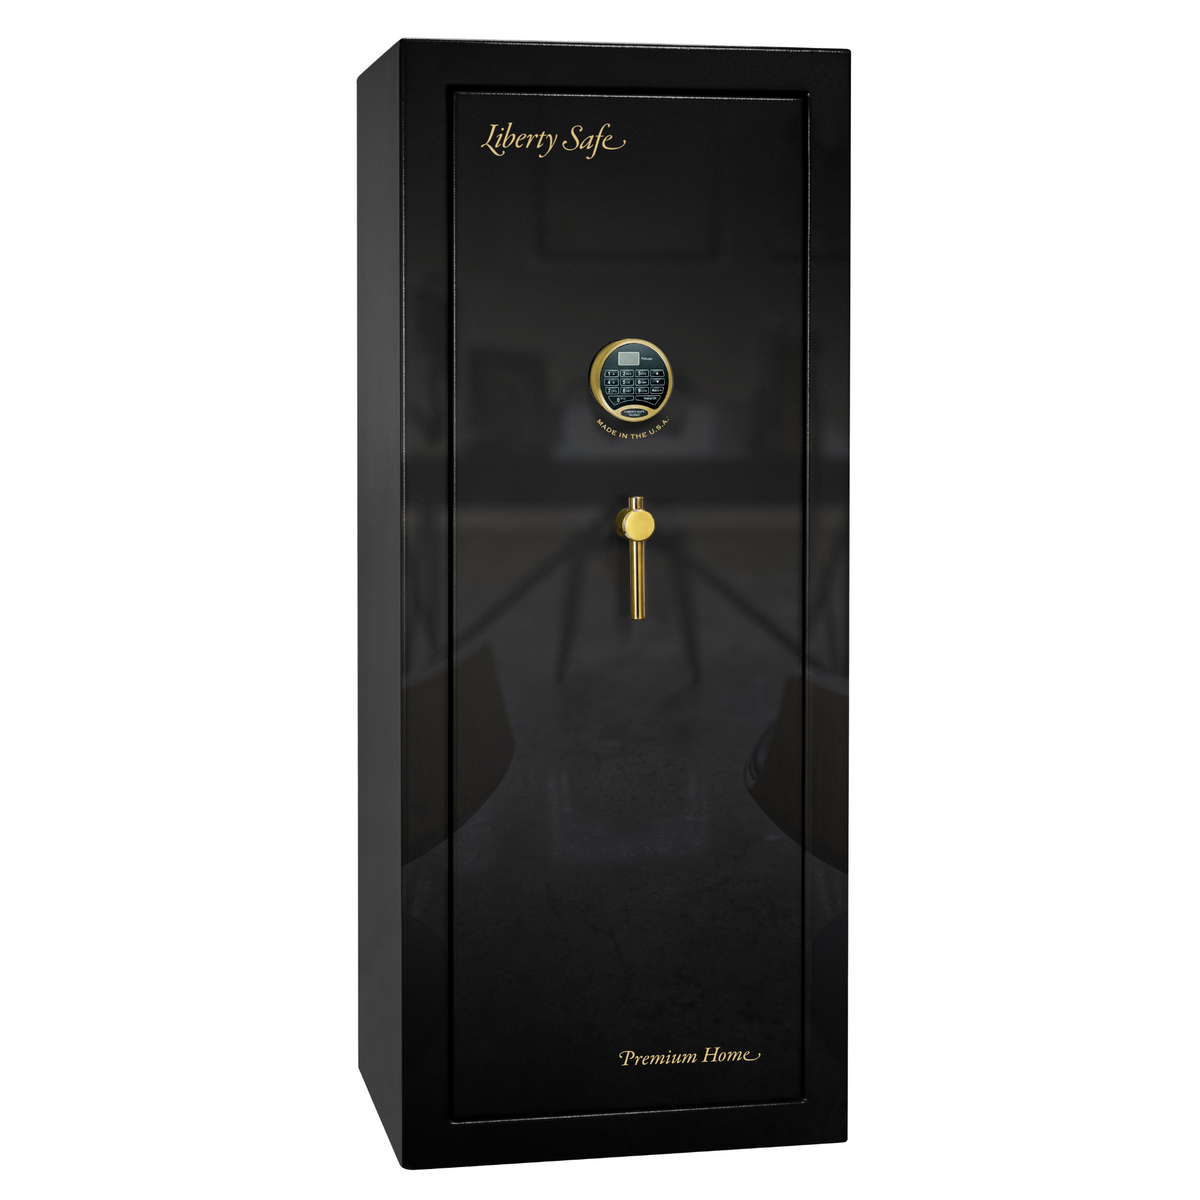 Premium Home Series | Level 7 Security | 2 Hour Fire Protection | 17 | Dimensions: 59.25&quot;(H) x 24&quot;(W) x 20.25&quot;(D) | Black Gloss Brass - Closed Door